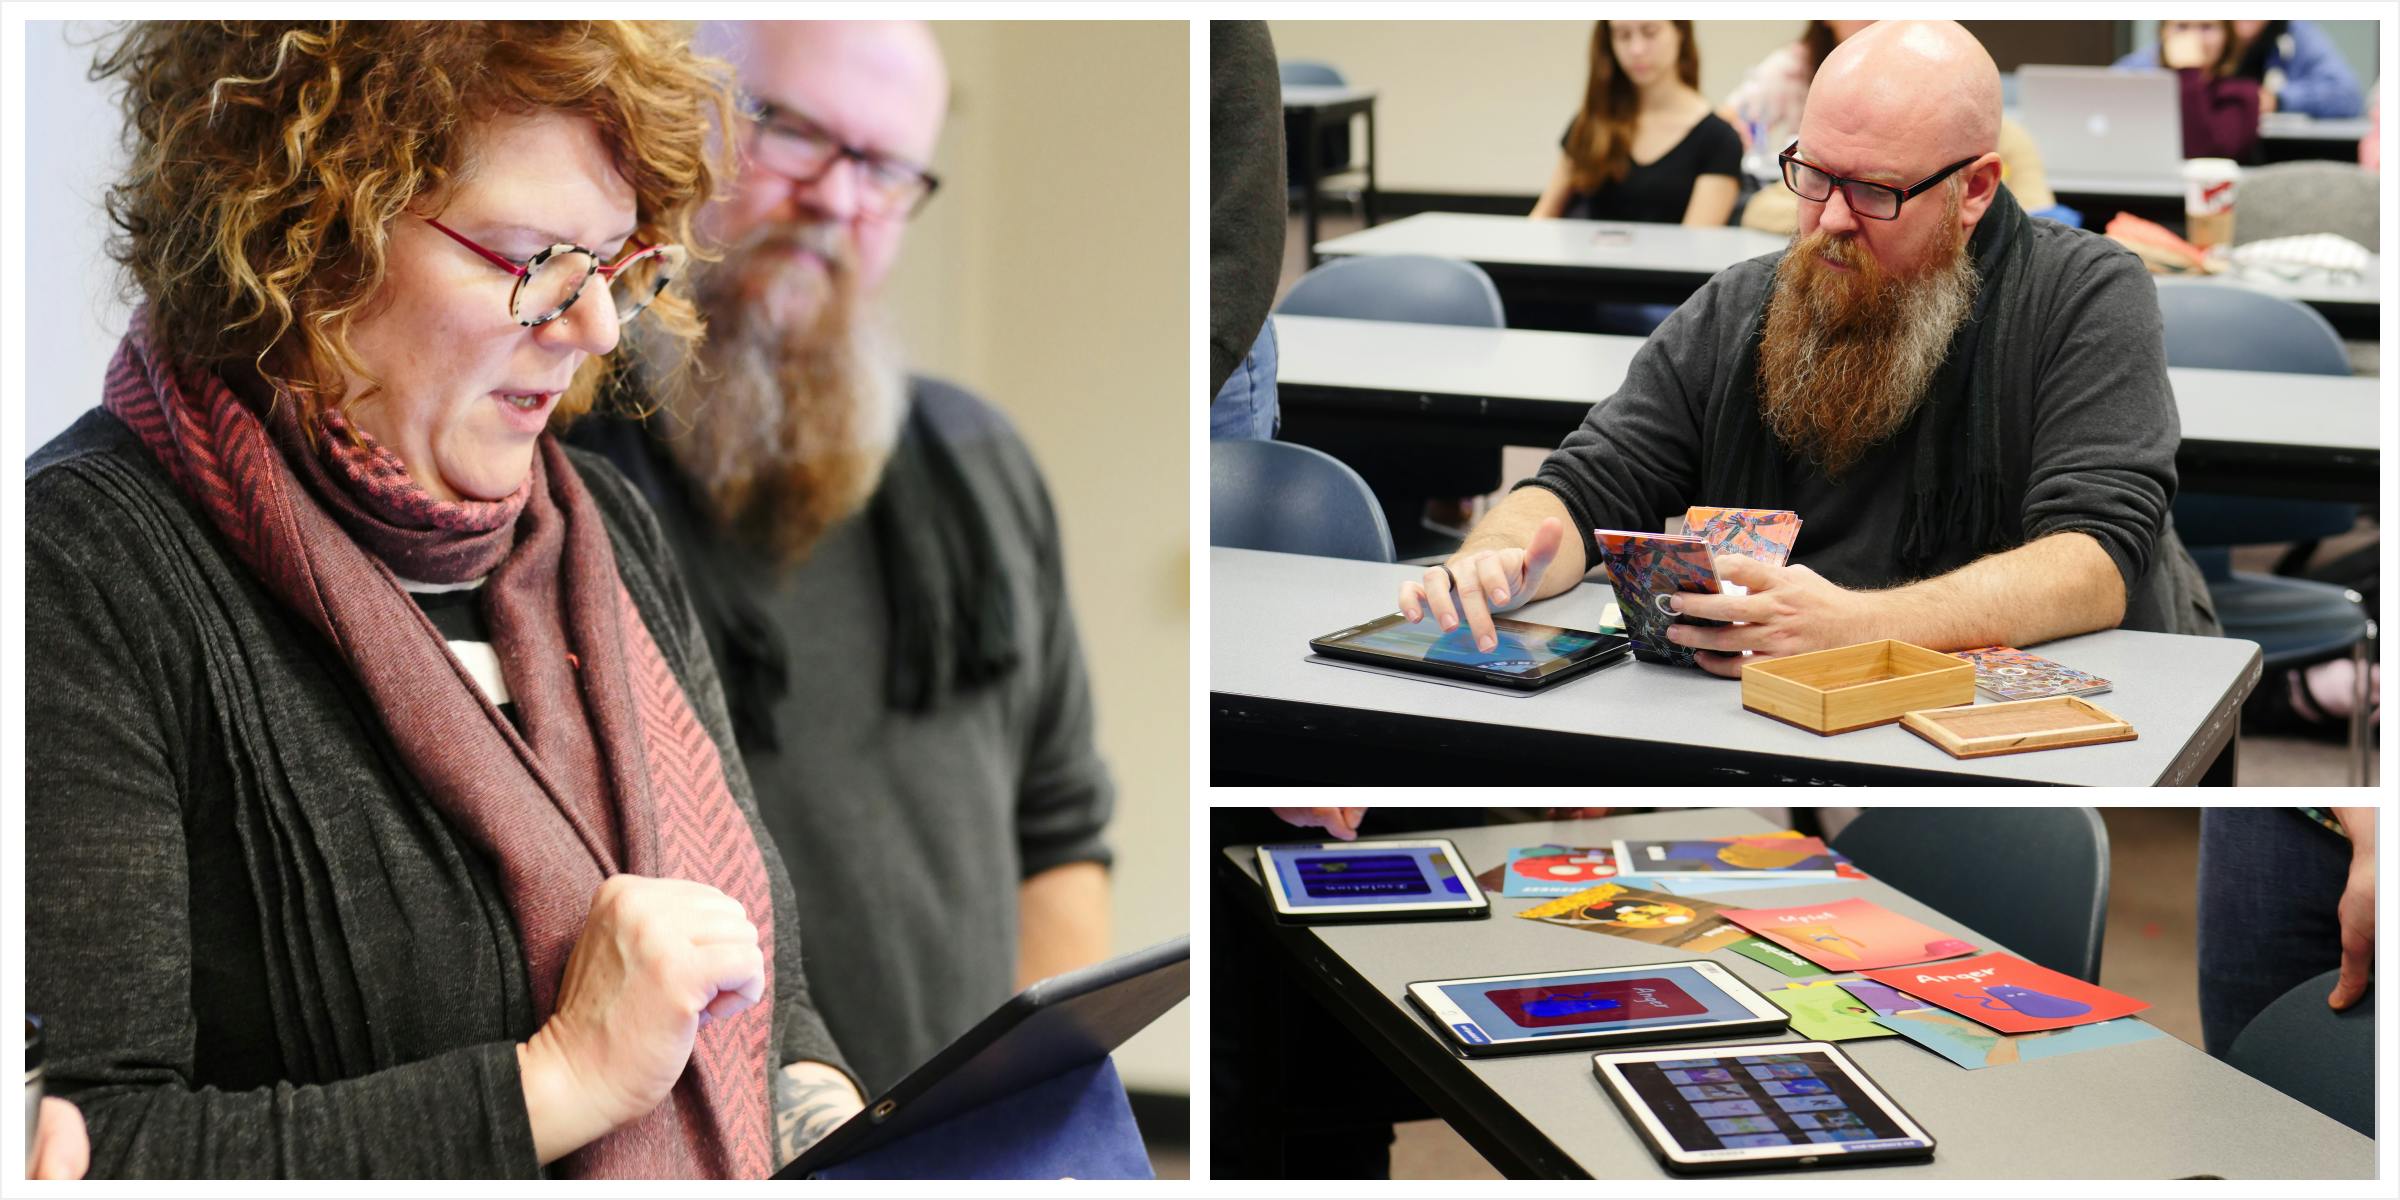 a grid of photos. A reviewer looking at an iPad. Another reviewer looking at an ipad and holding cards. cards and iPads on a table.